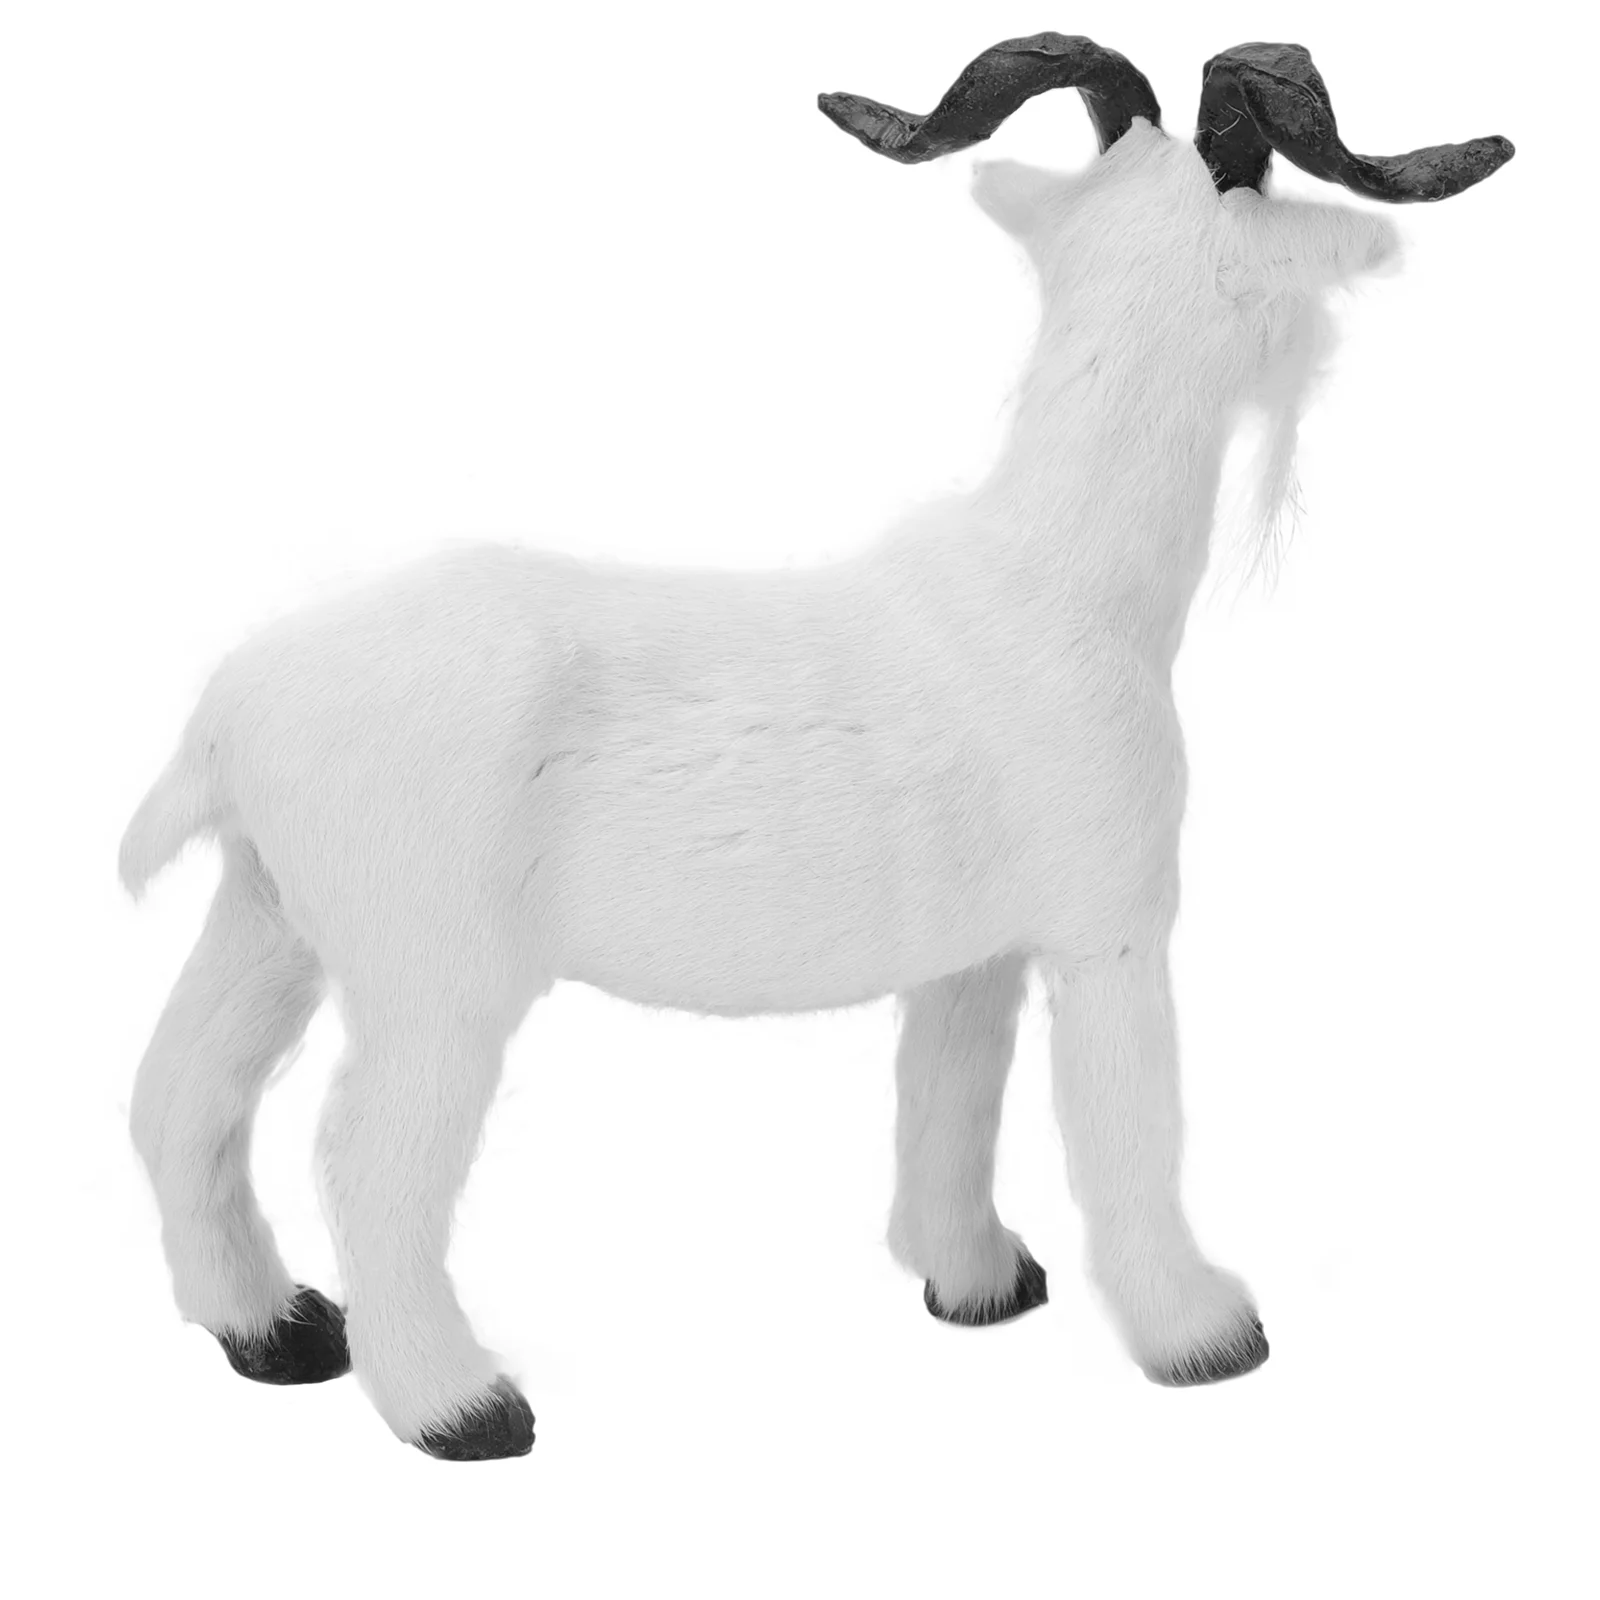 

Goat Figurines Realistic Farm Animals Sheep Figurine Miniature Goat Statue Wild Animal Wildlife Toy for Toddlers Kids Education